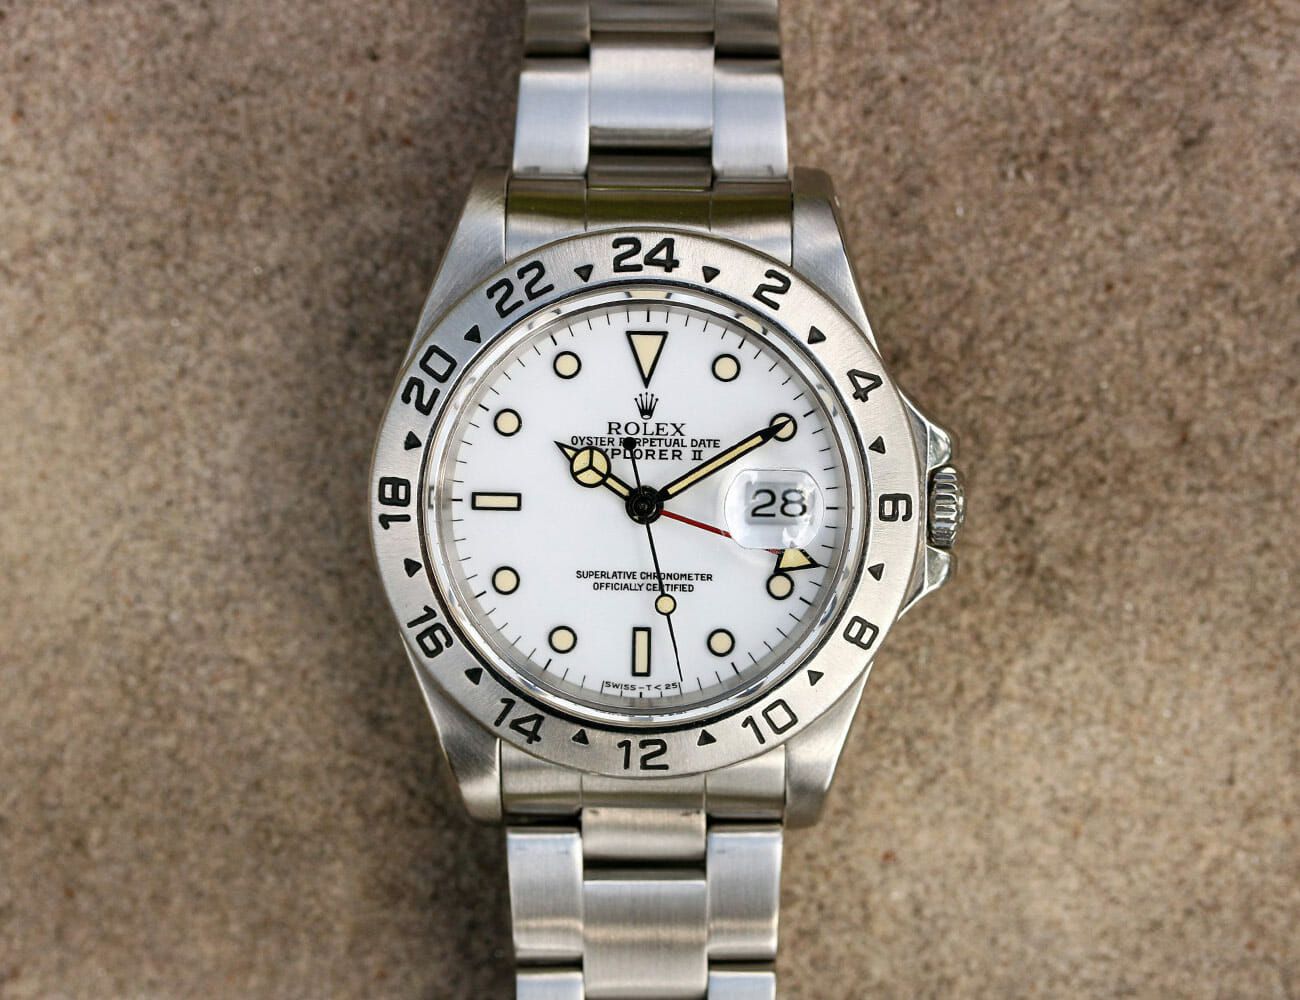 A Killer Dive Watch for Under $500 and 